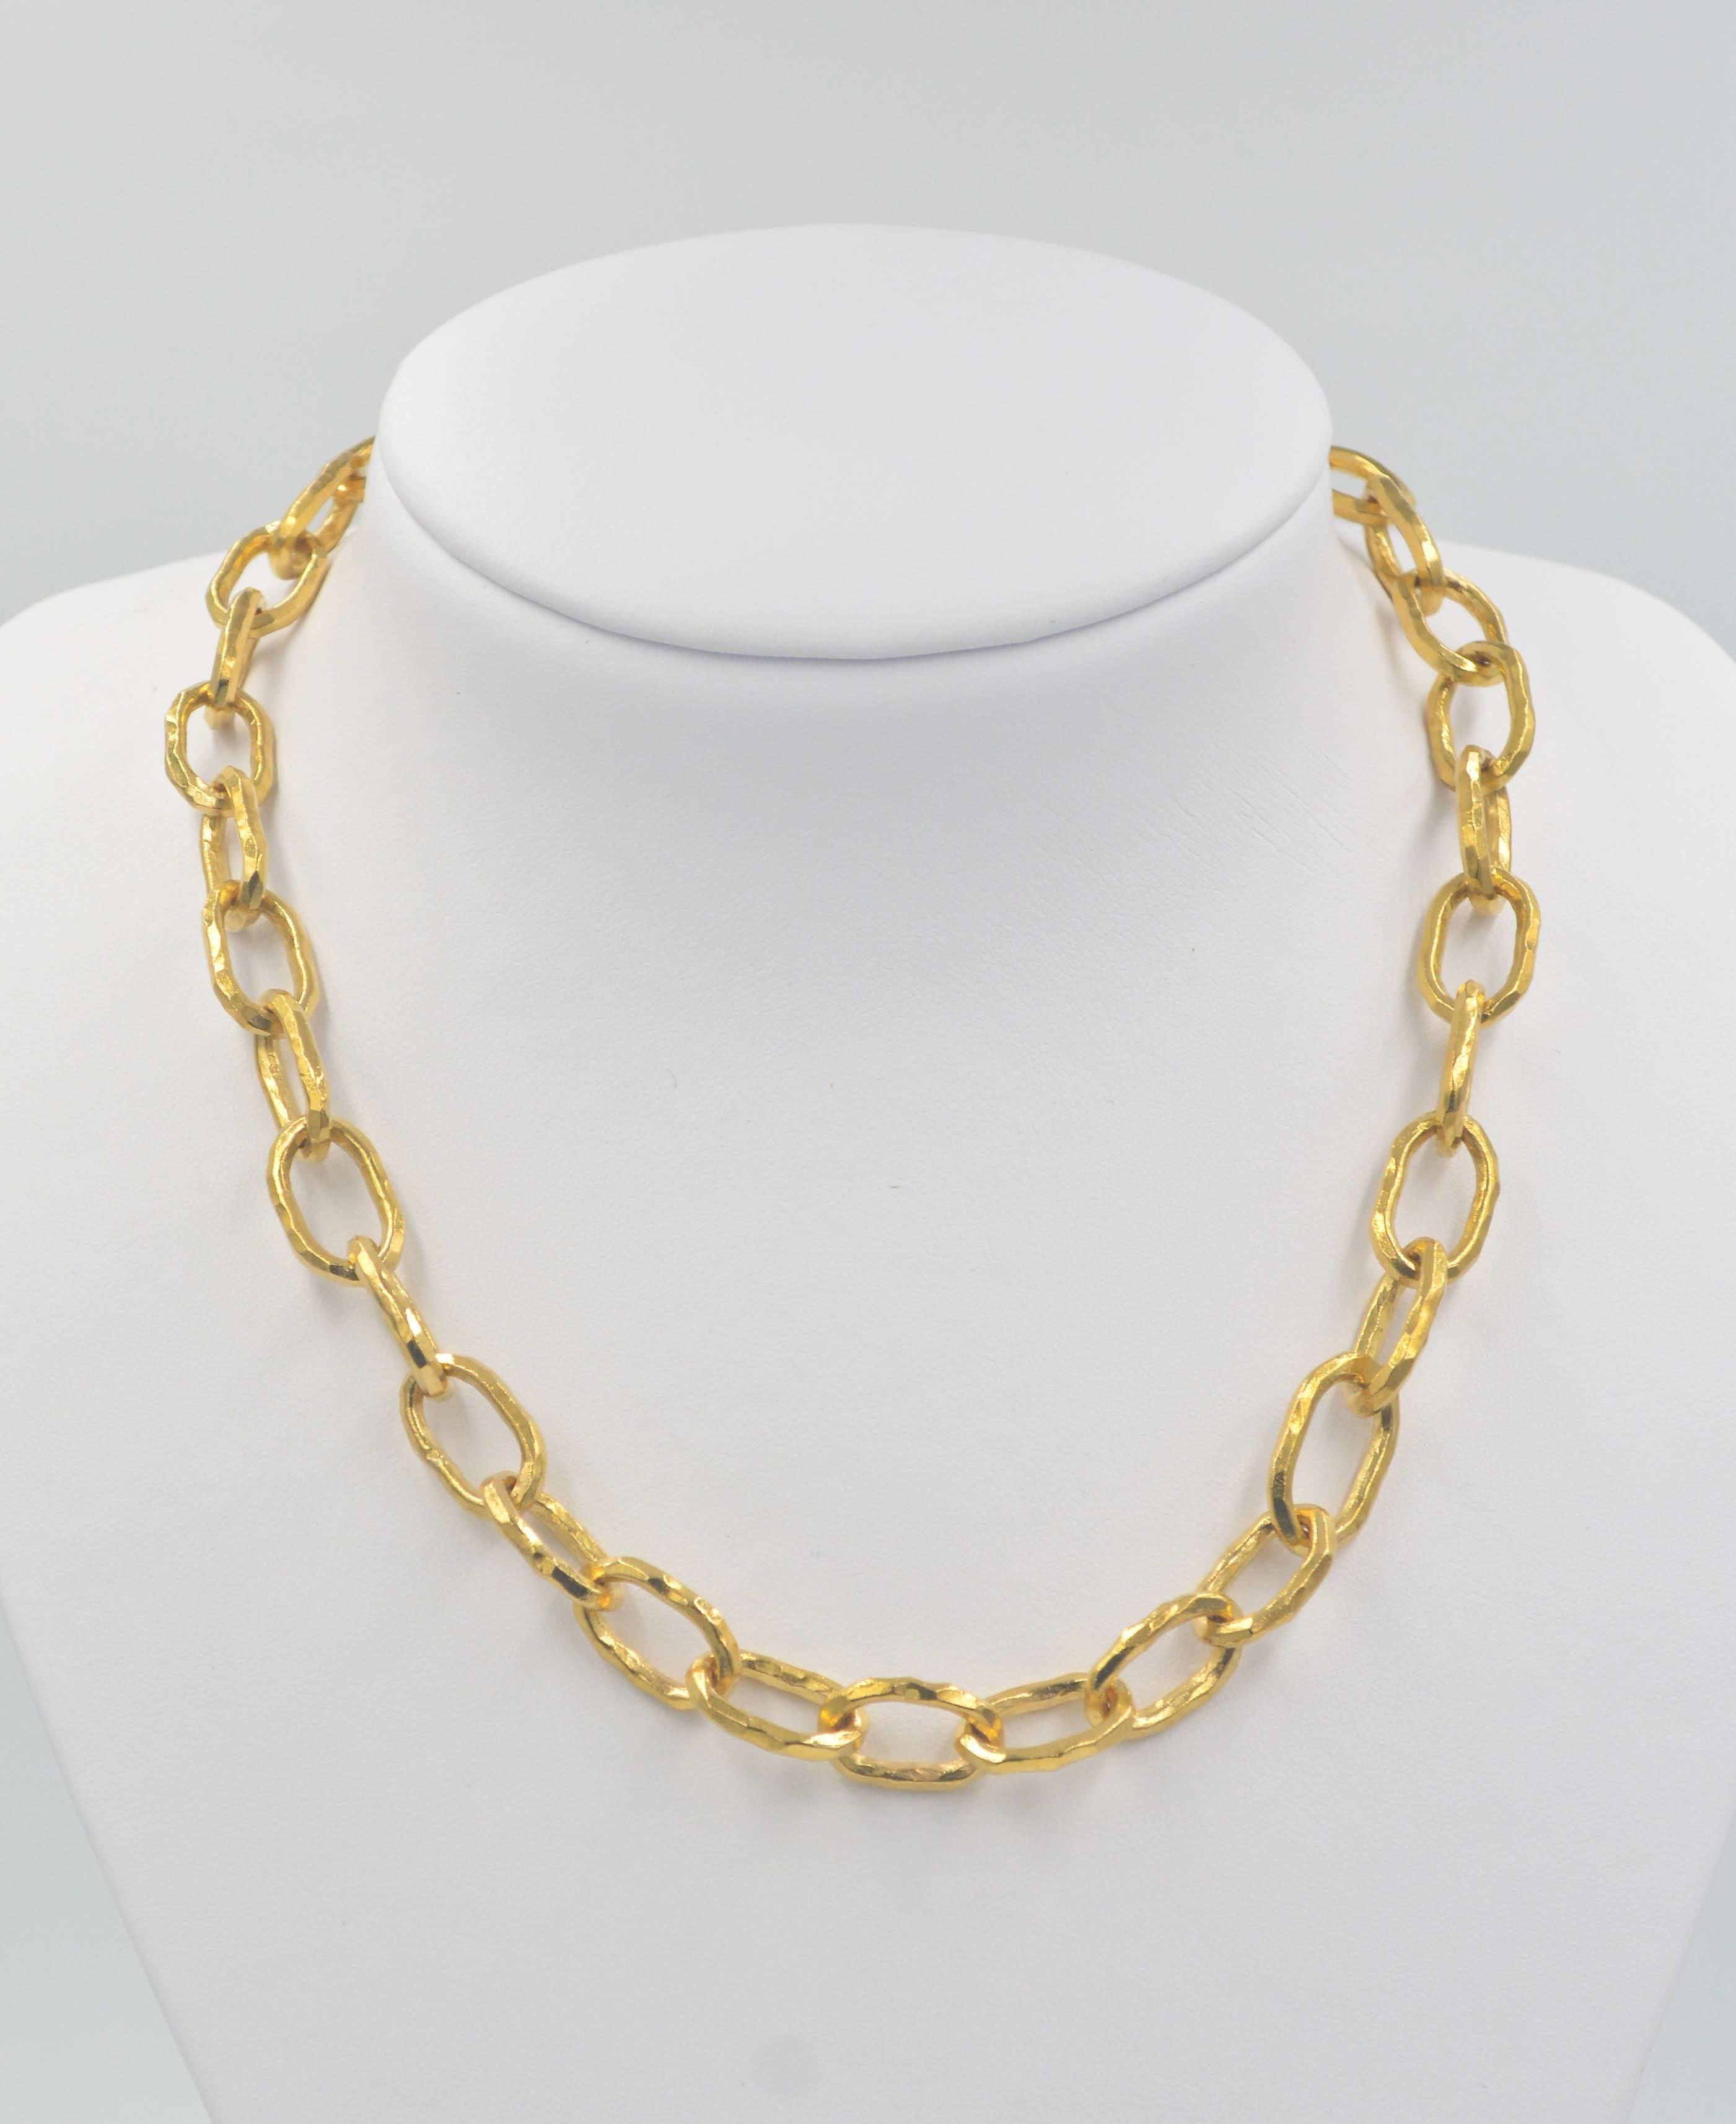 This classic Jean Mahie Large Cadene chain necklace features the primitive style hammered finish on its 22kt yellow gold links that has made Jean Mahie famous. These beautiful cadene chains are comfortable to wear and are always sure to be noticed.